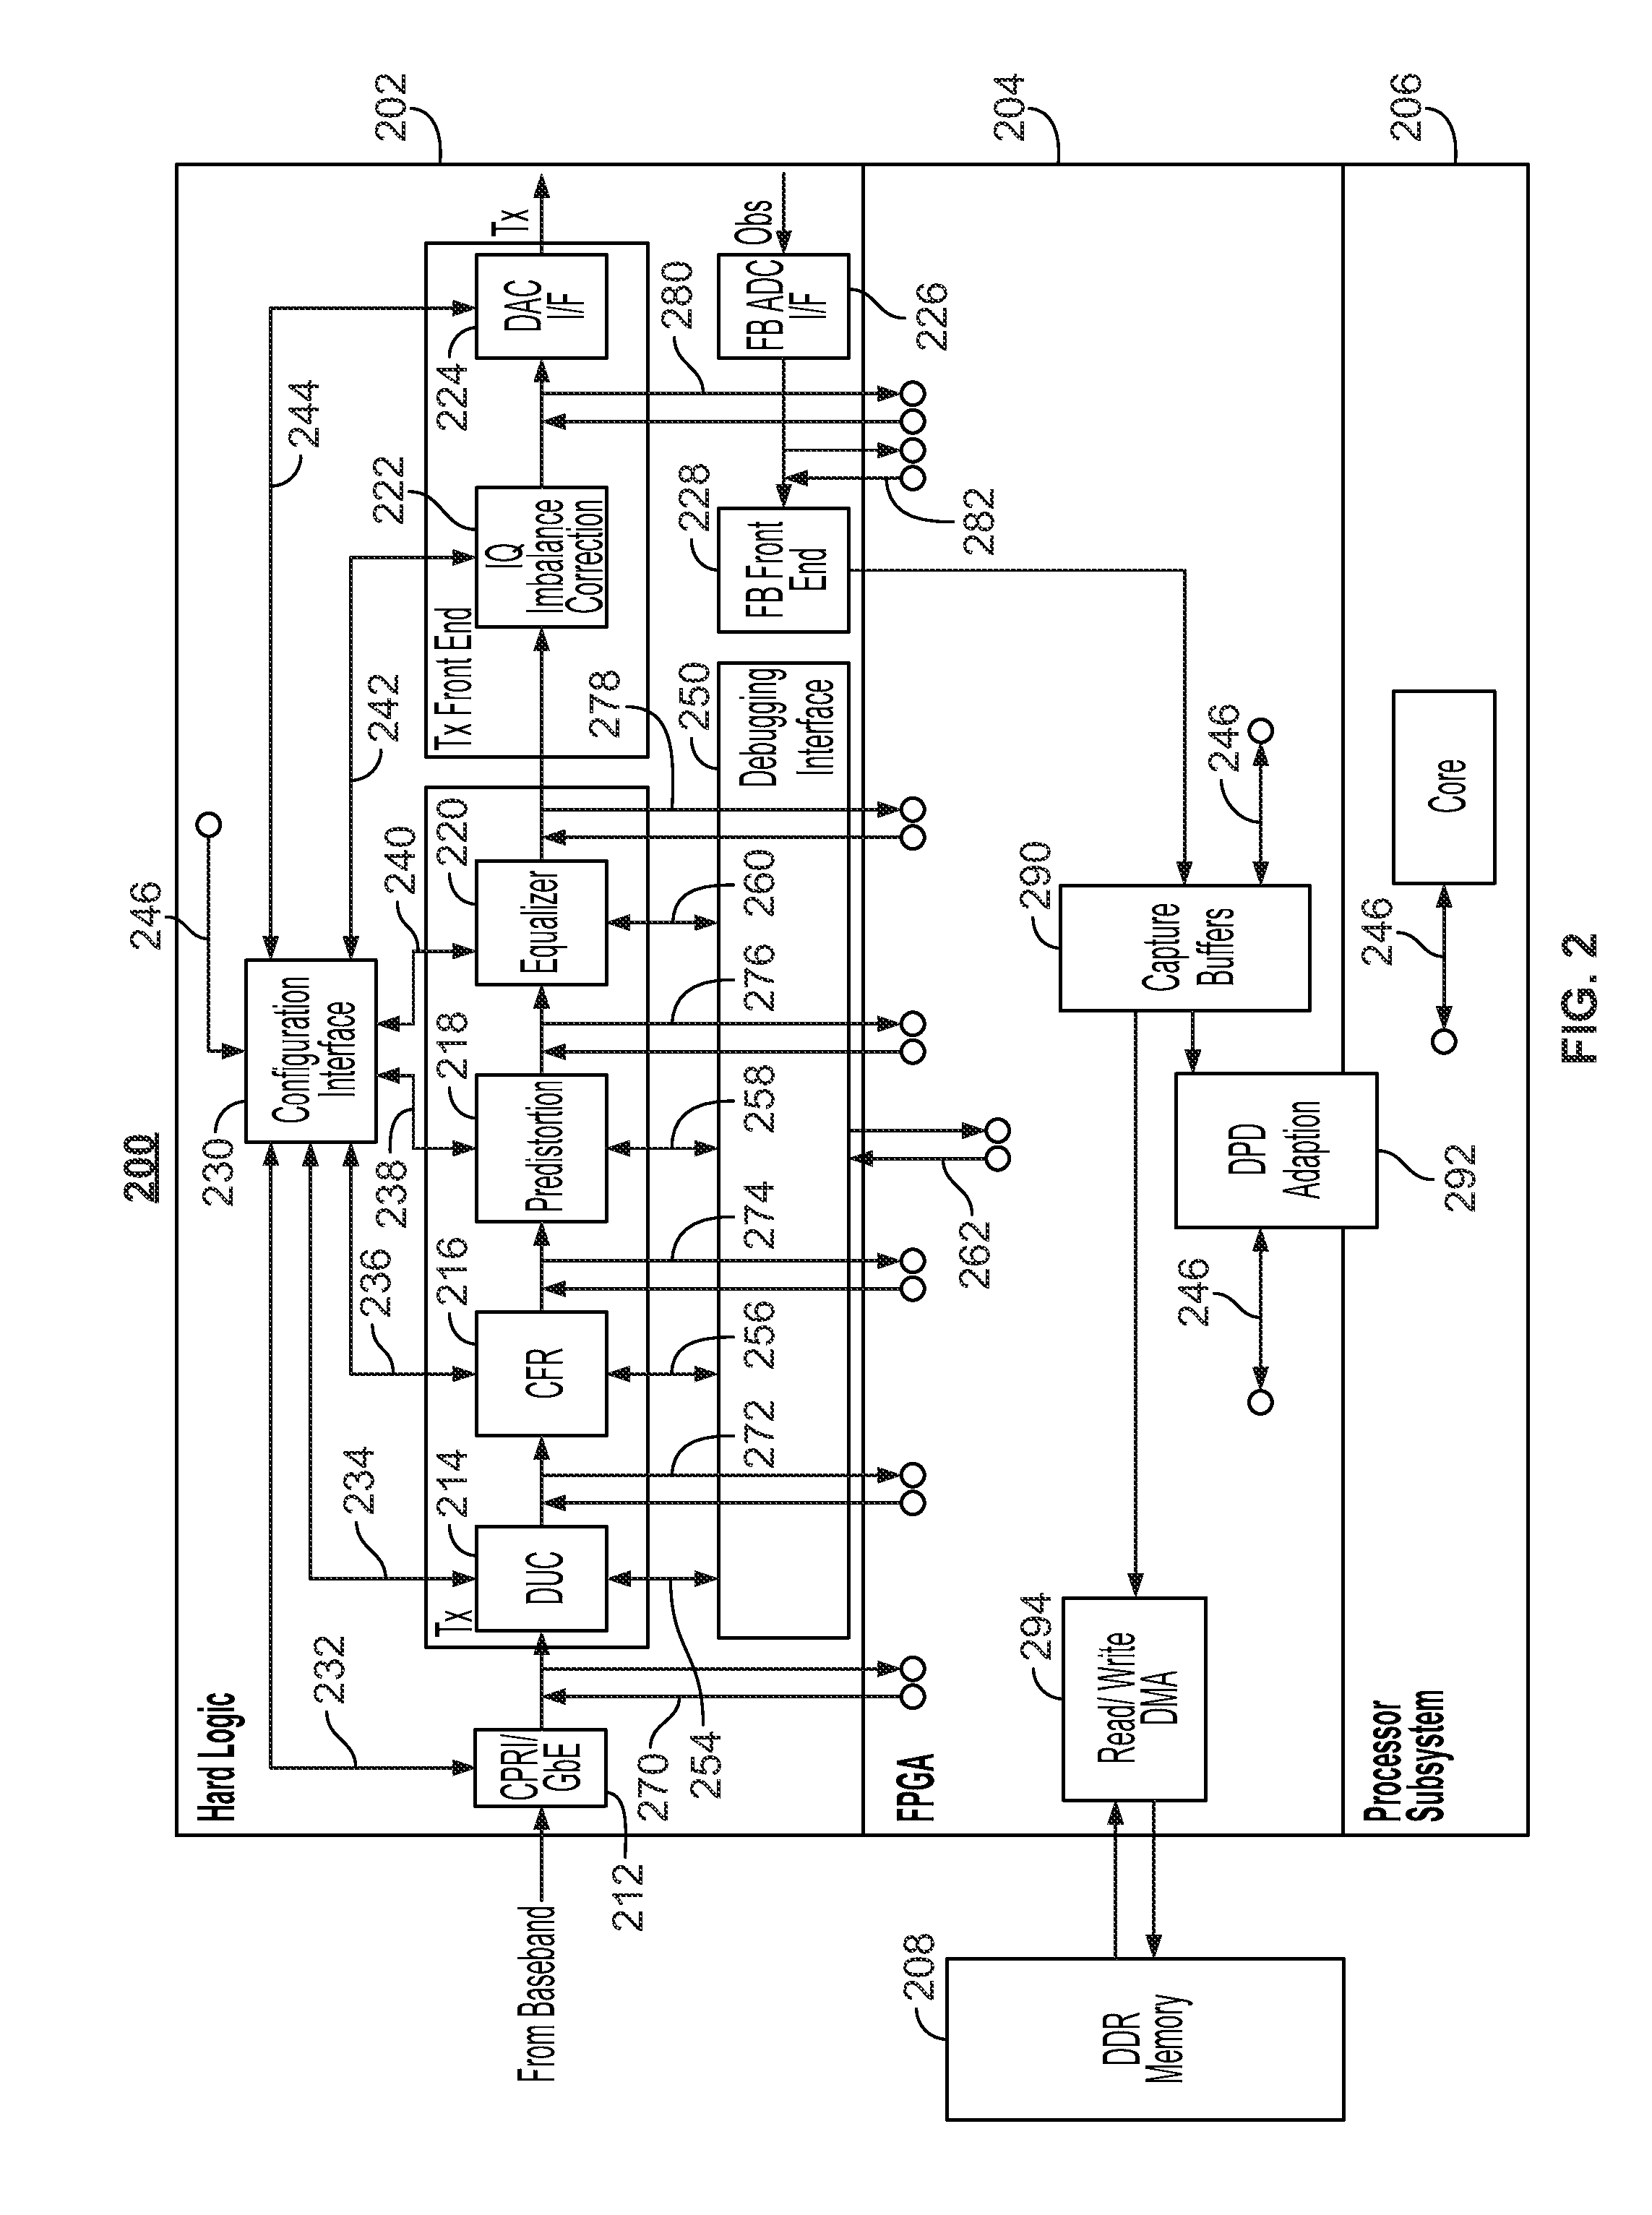 Systems and methods for interfacing between hard logic and soft logic in a hybrid integrated device